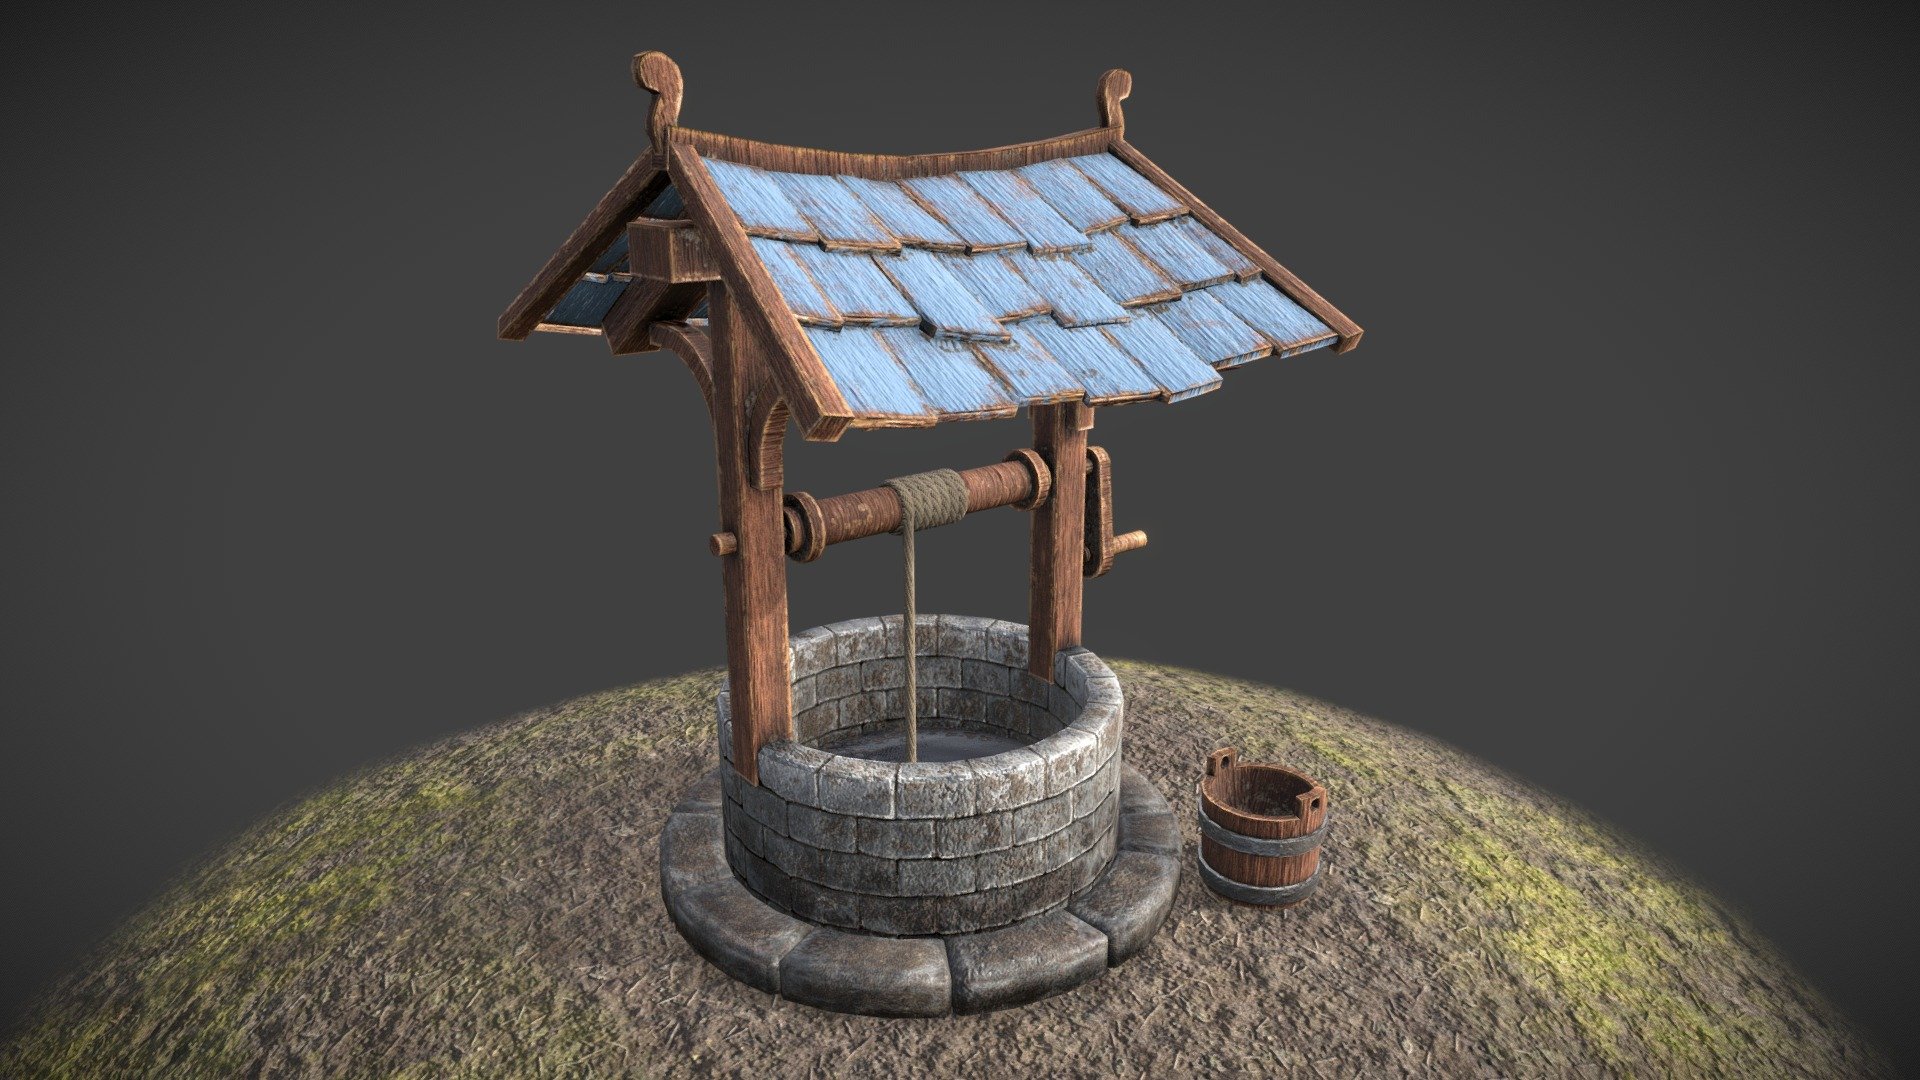 An old, dirty well at the top of a hill. I wouldn't drink that water if I were you!

Modeled in 3DS Max, Textured in Substance Painter 3d model